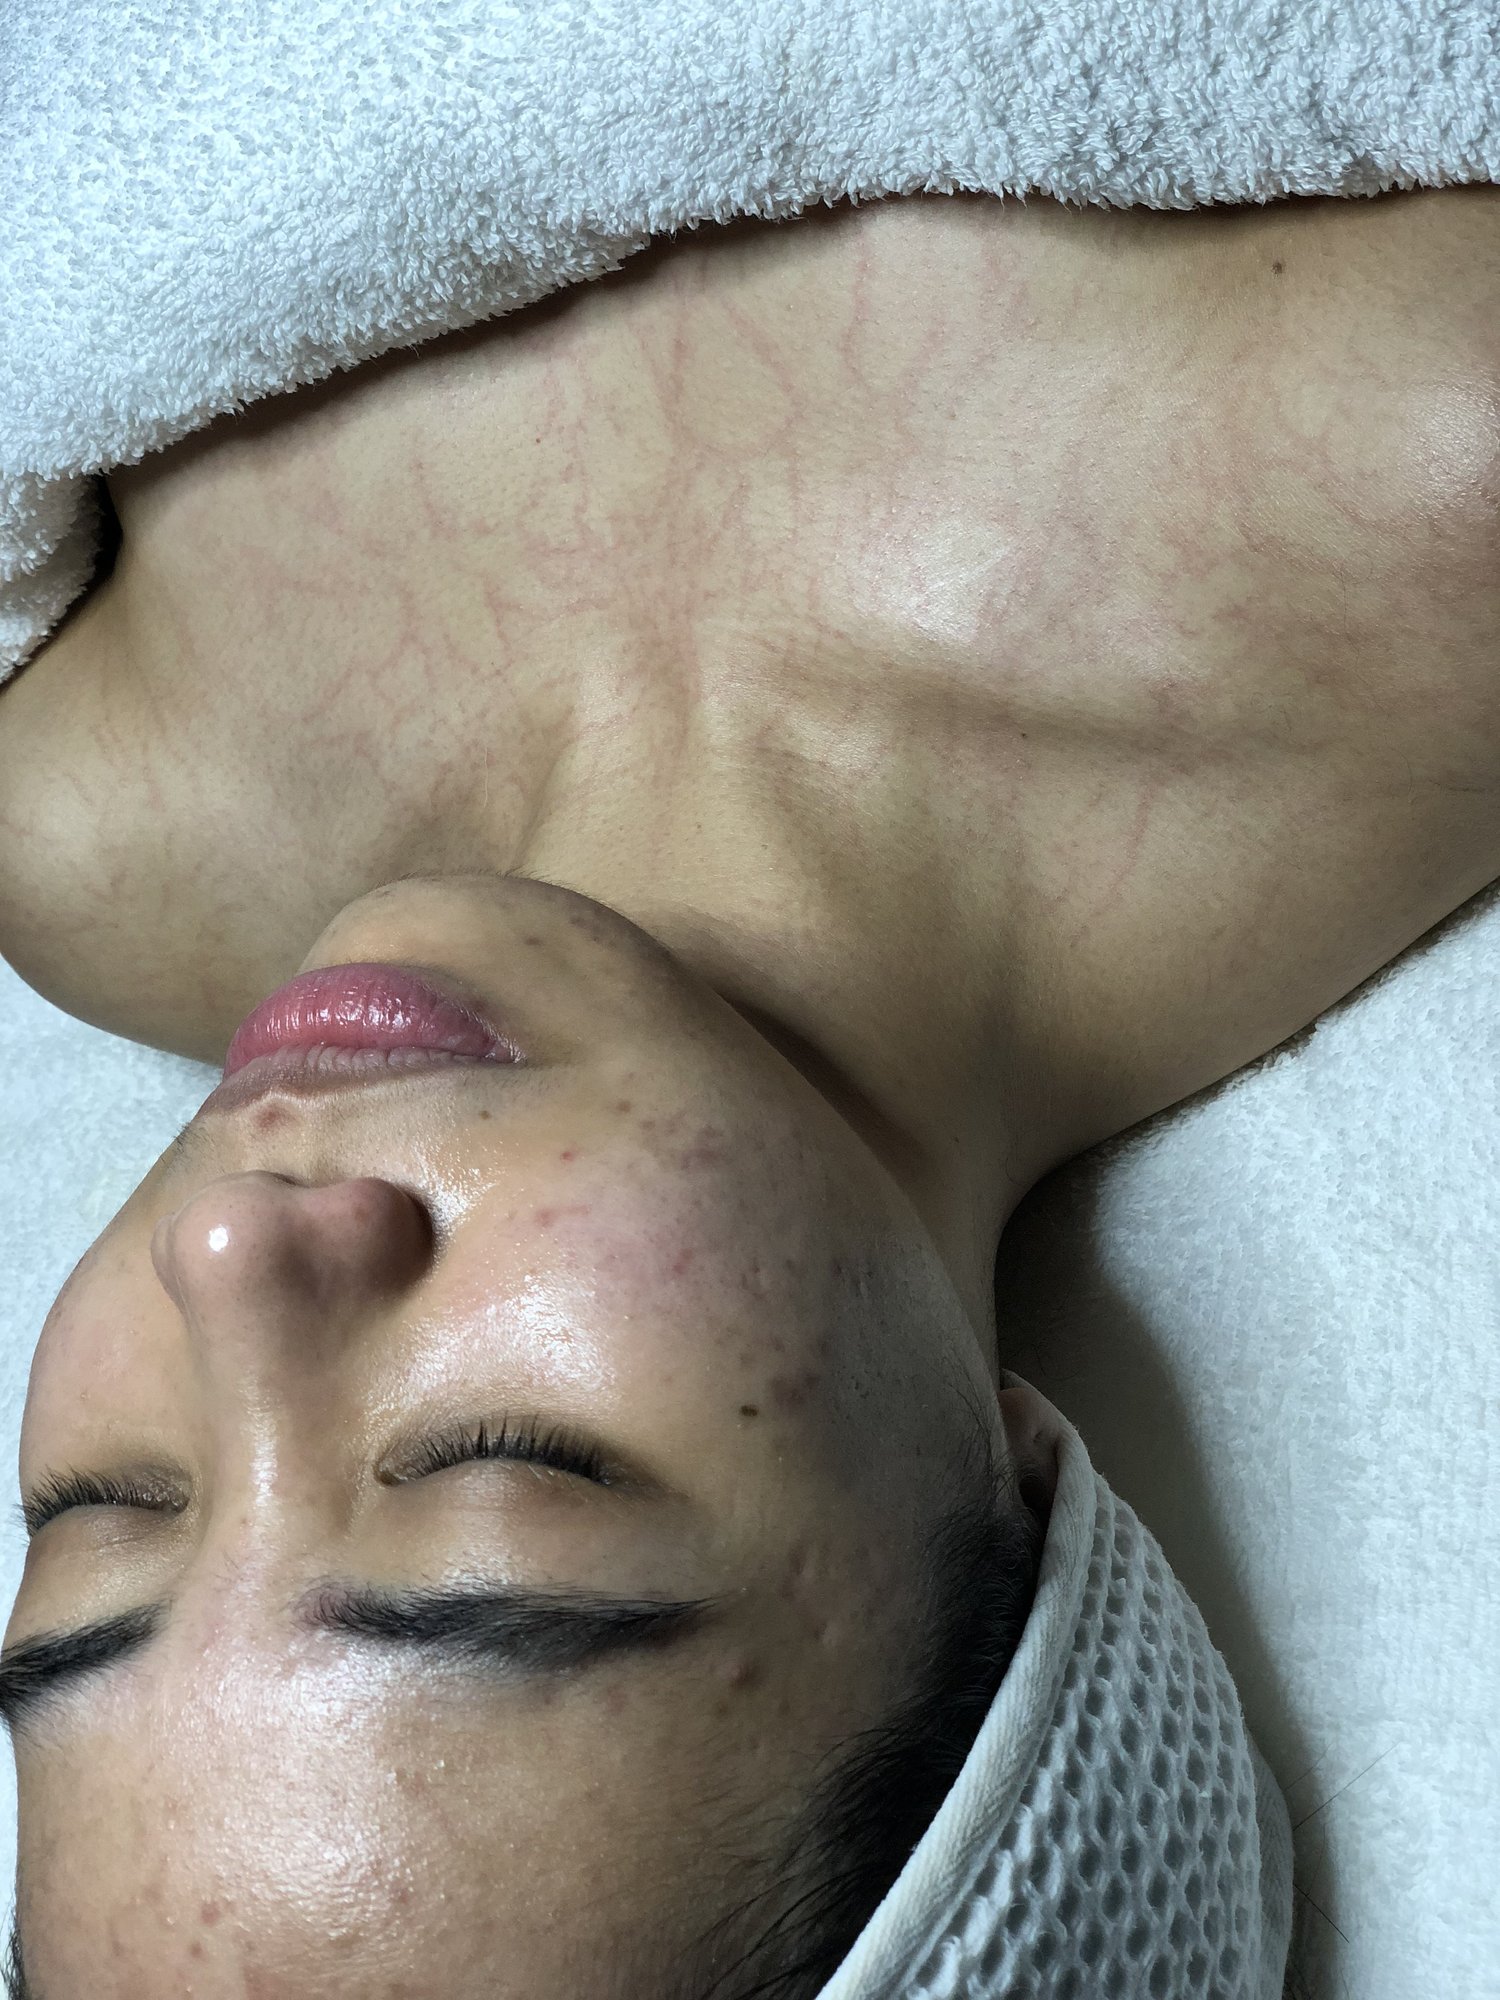 DMK Enzyme Therapy — With Grace Skin Management